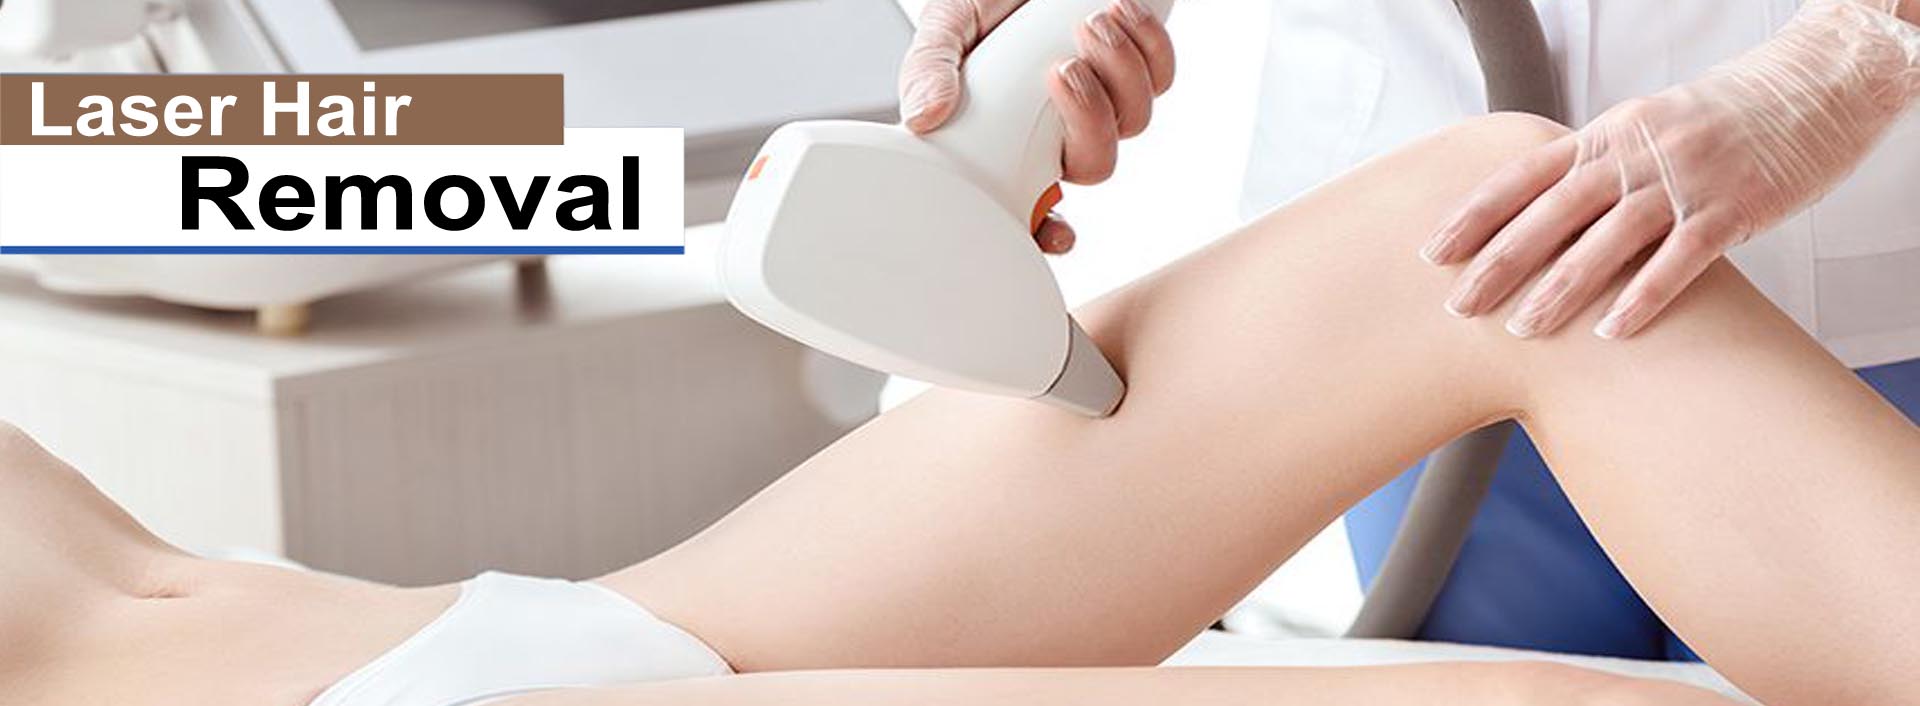 Best Laser Hair Removal Treatment Clinic in Gurgaon